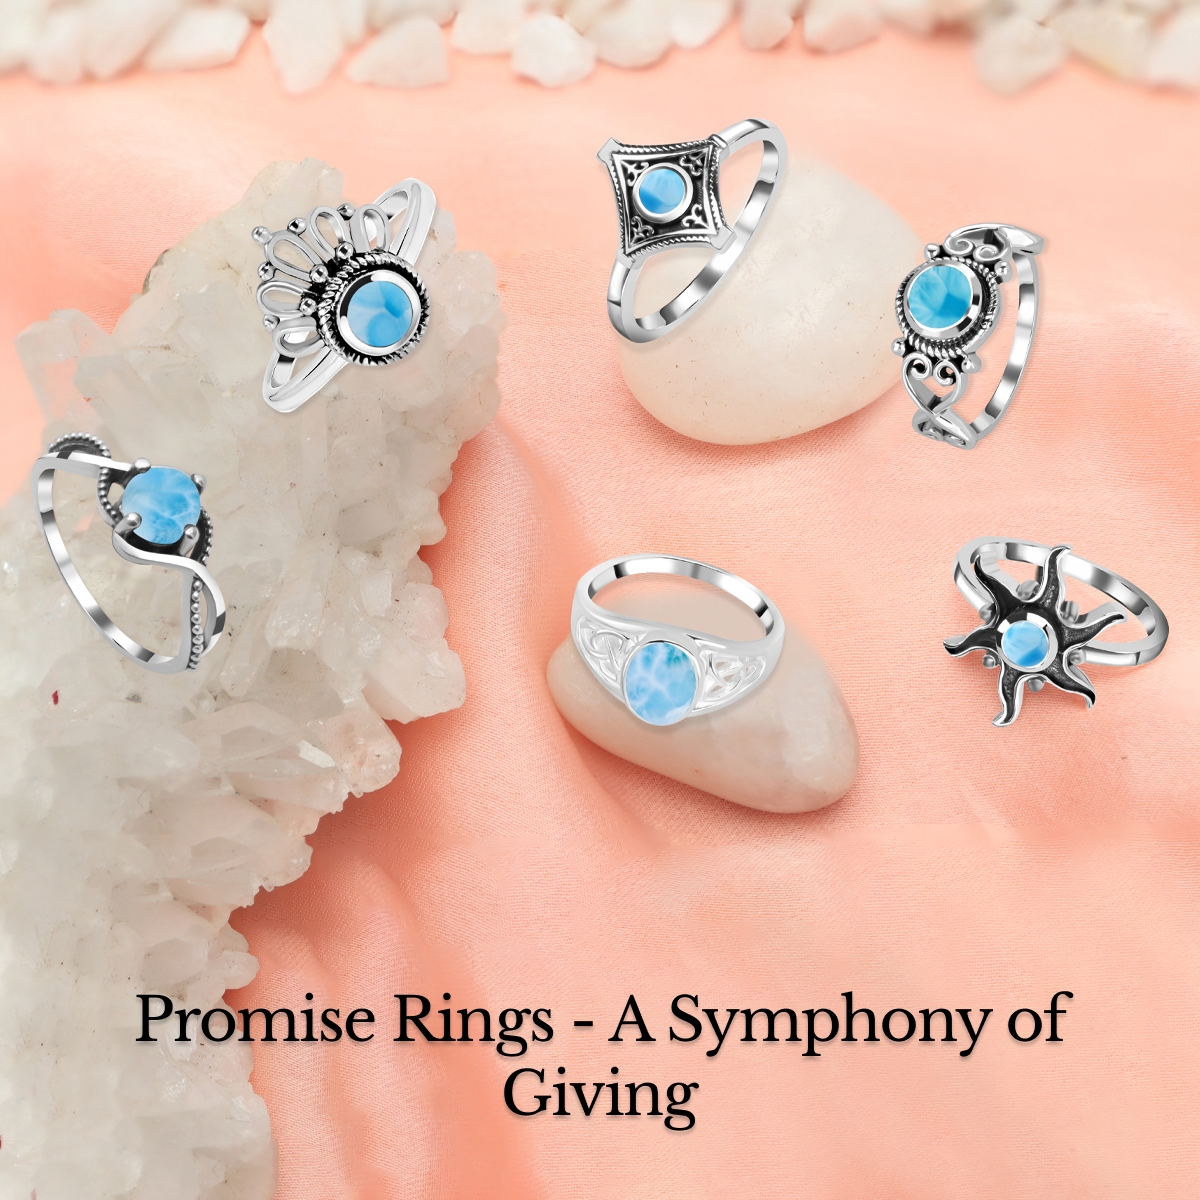 Giving and Receiving Promise Rings